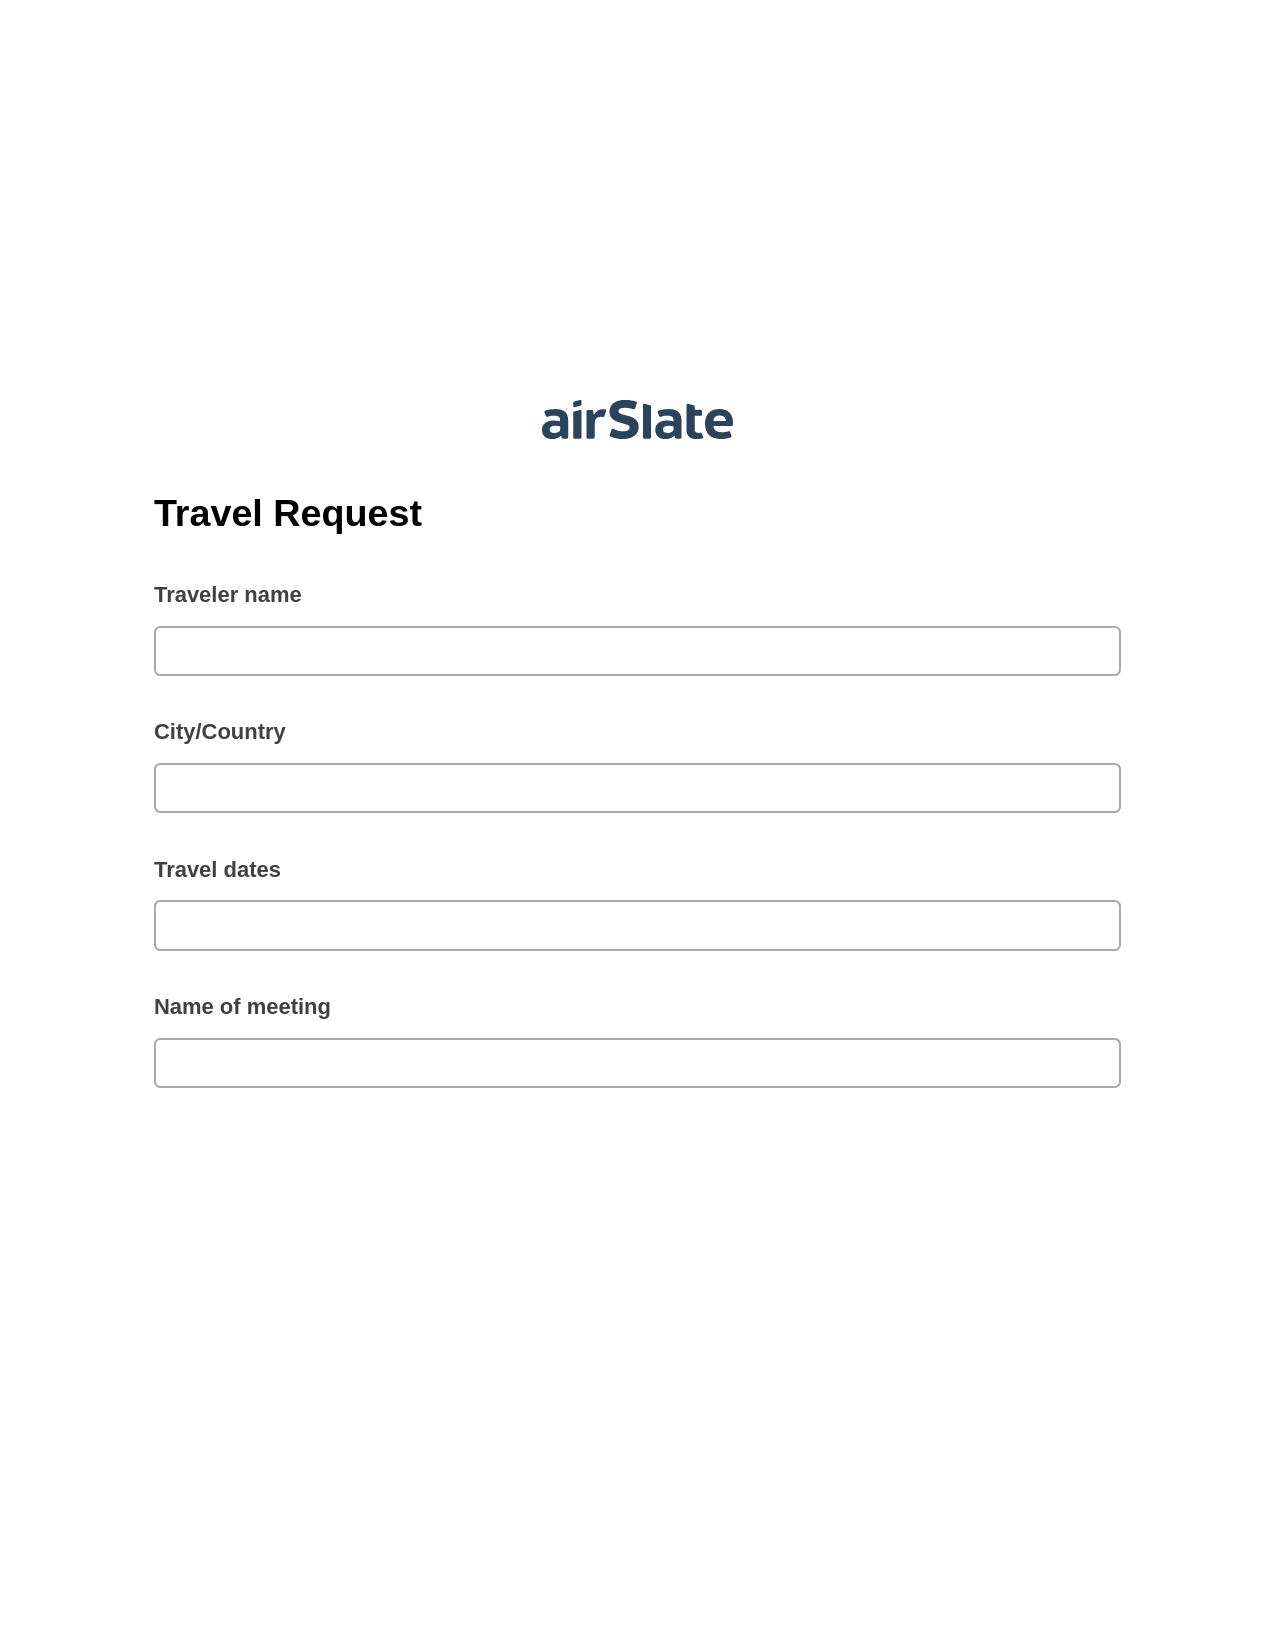 Travel Request Pre-fill from another Slate Bot, Create QuickBooks invoice Bot, Export to Smartsheet